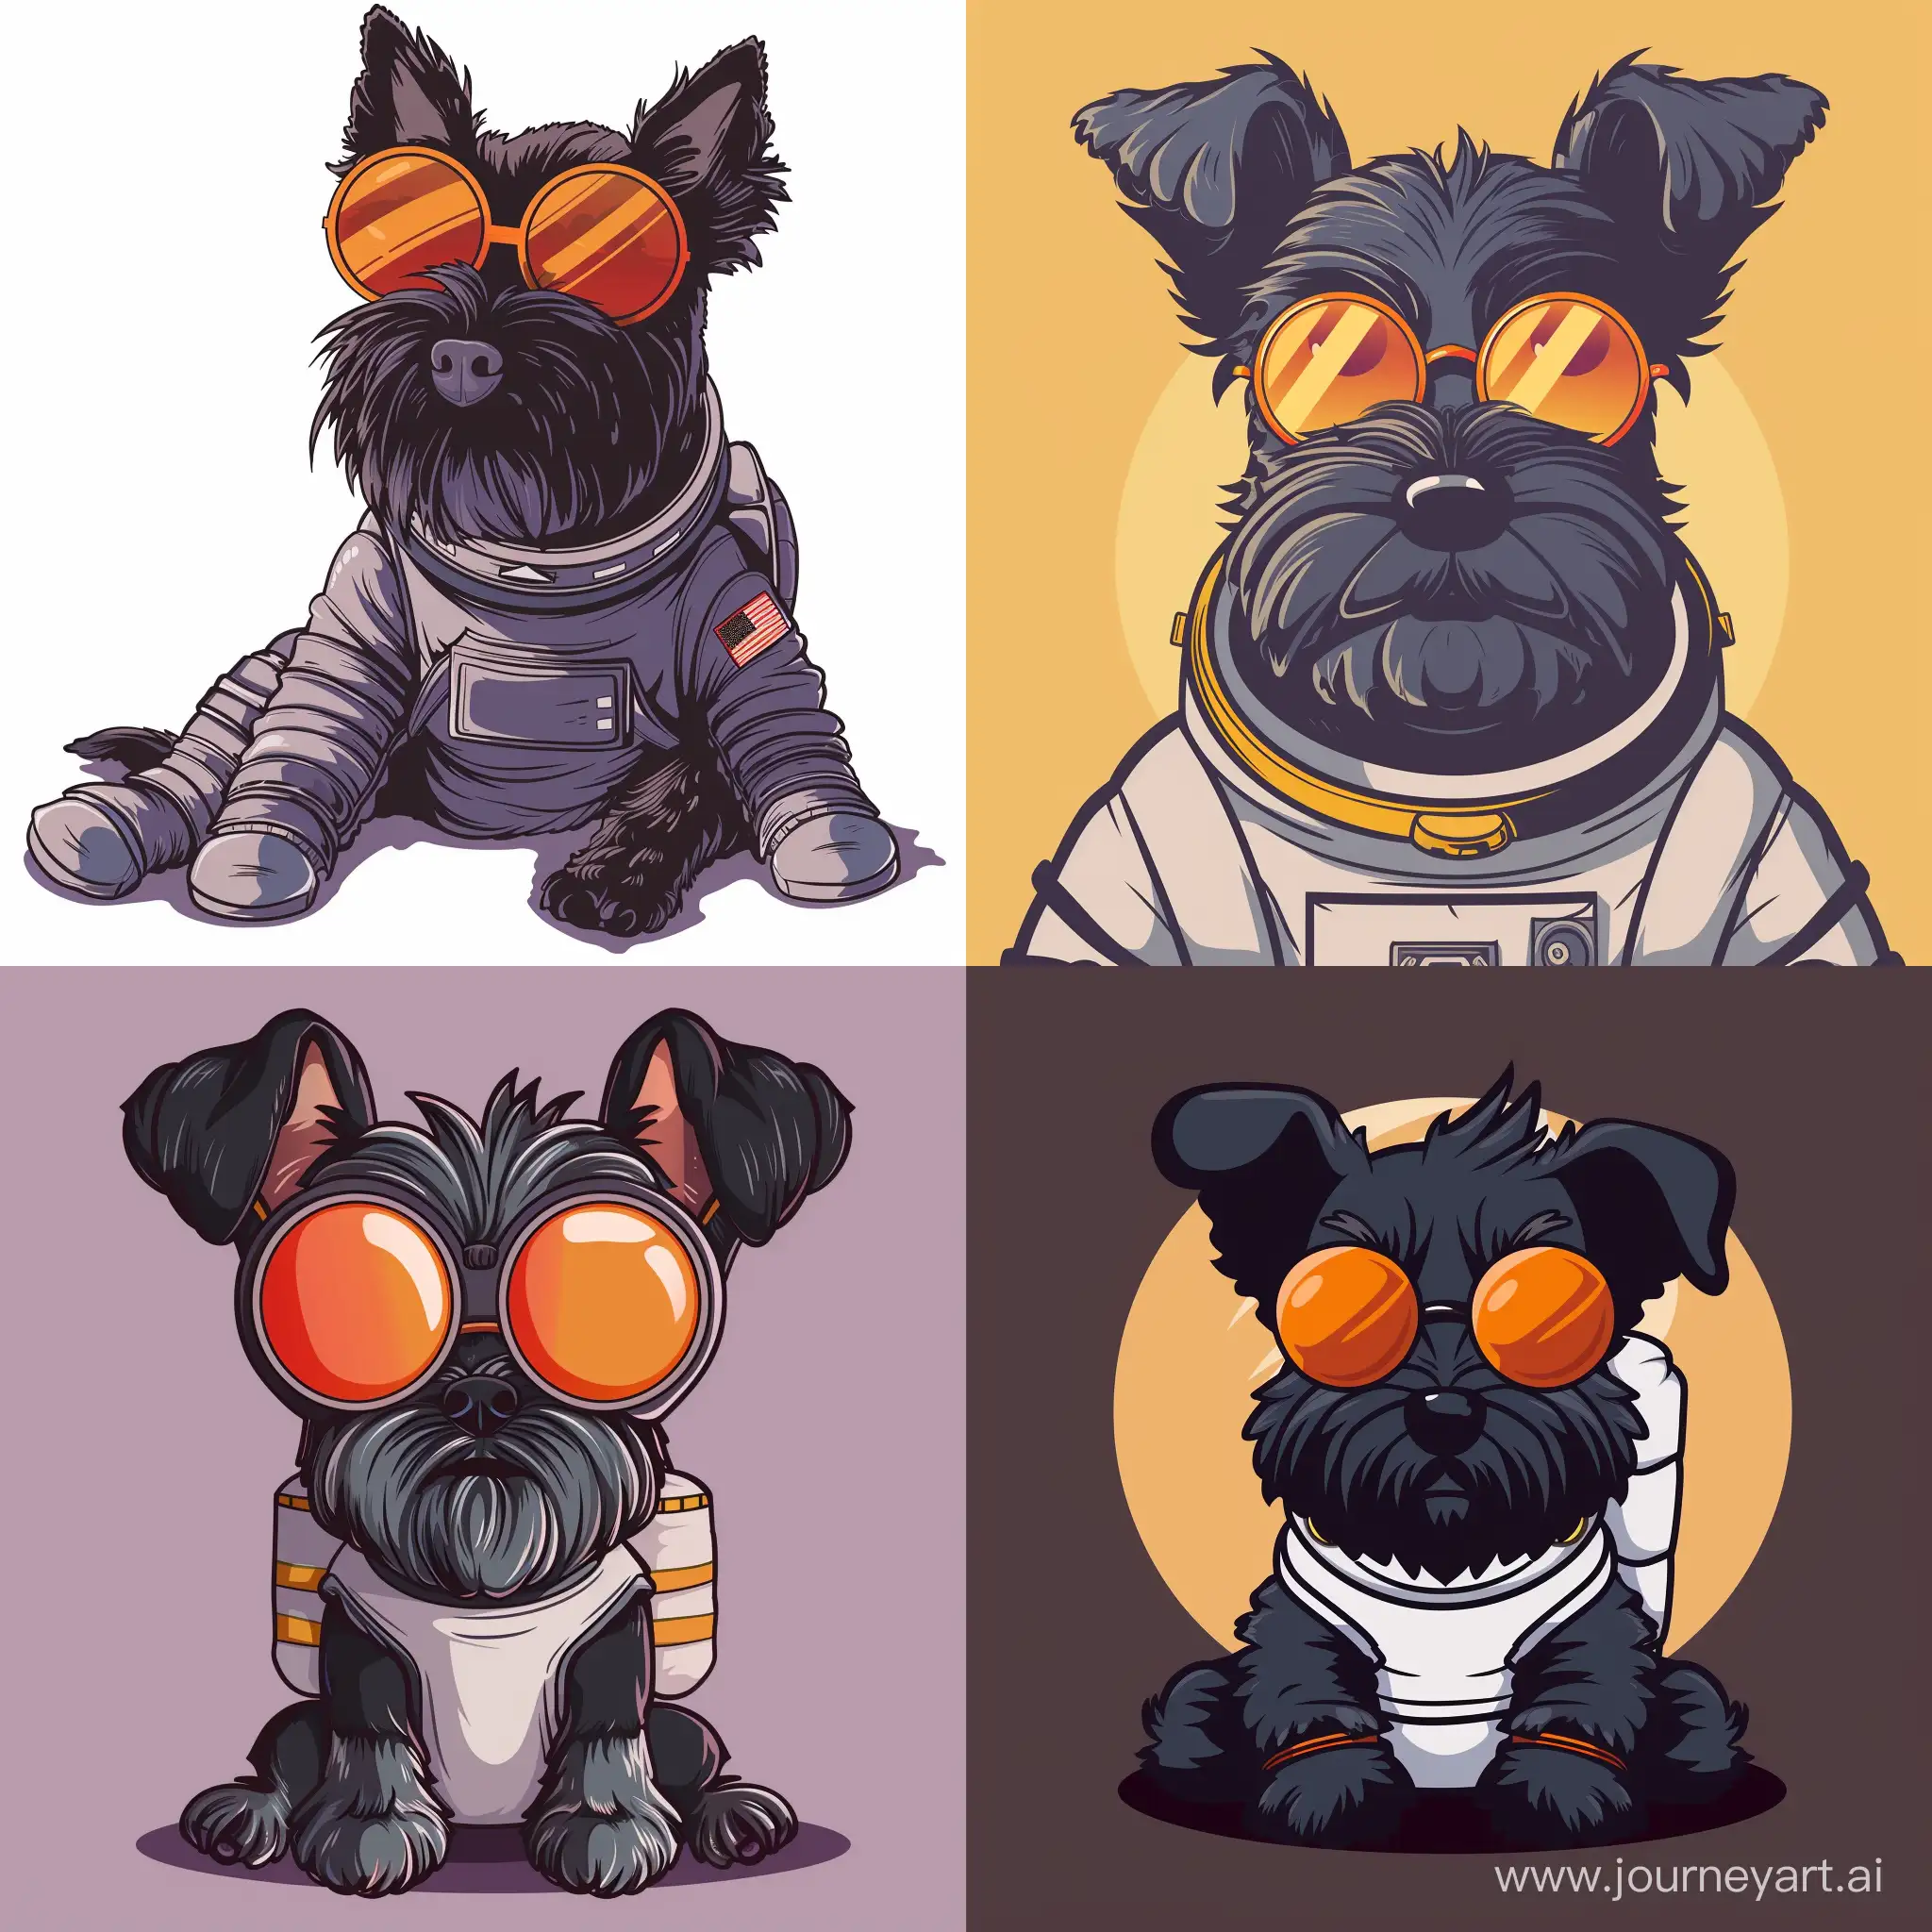 illustration  of a black Scottish Terrier dressed as an astronaut and with round sunglasses of orange color, cartoon style